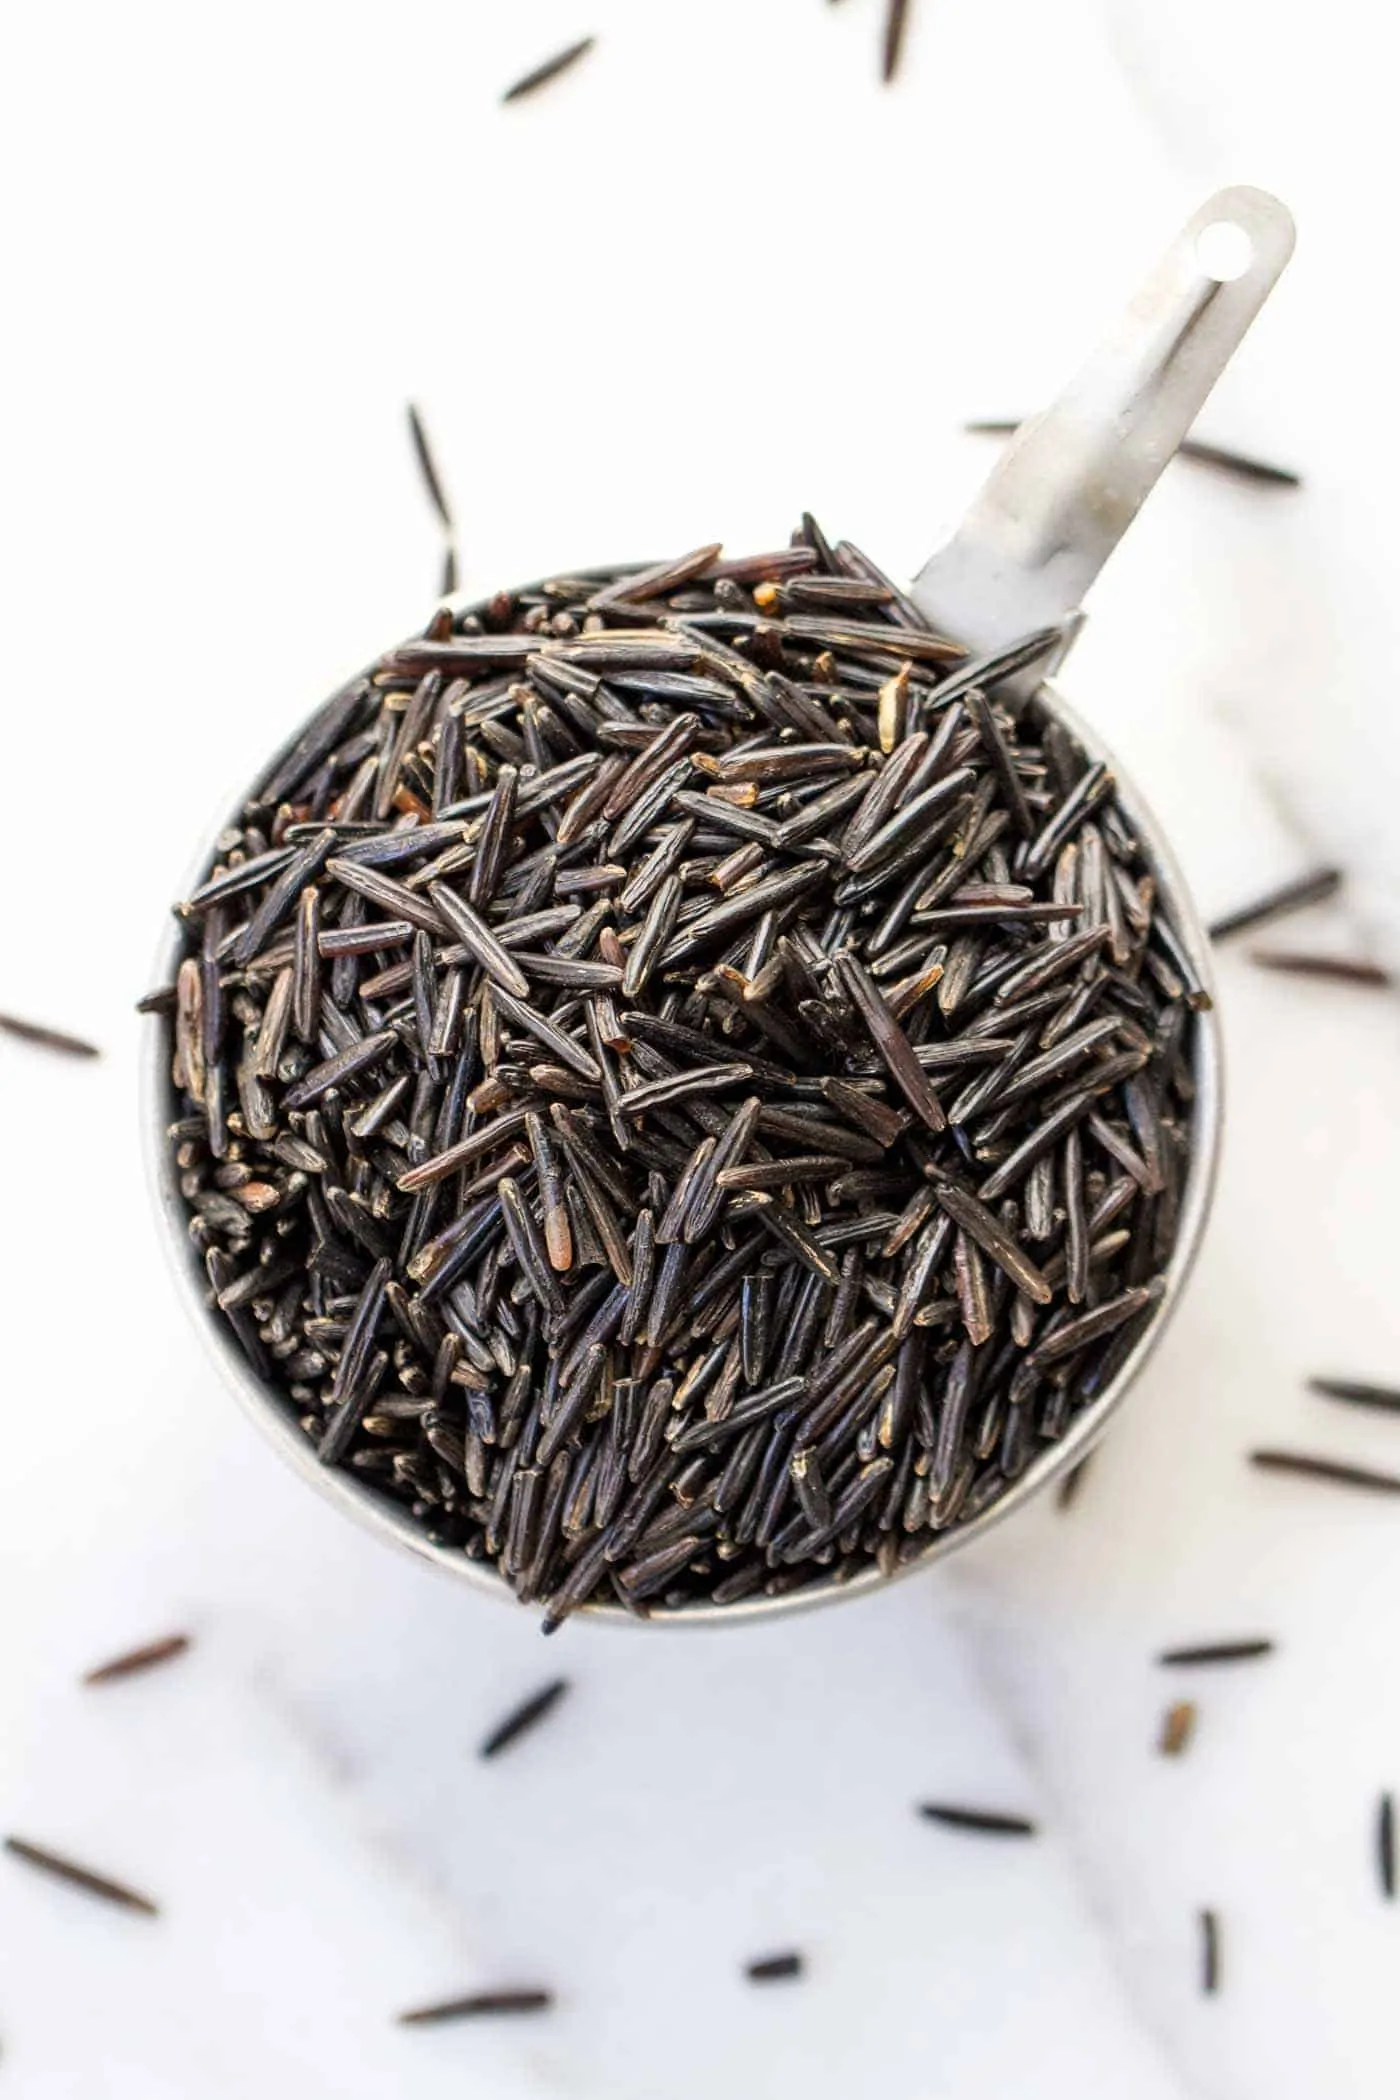 WILD RICE: one of the six staple whole grains you should have you in your pantry!